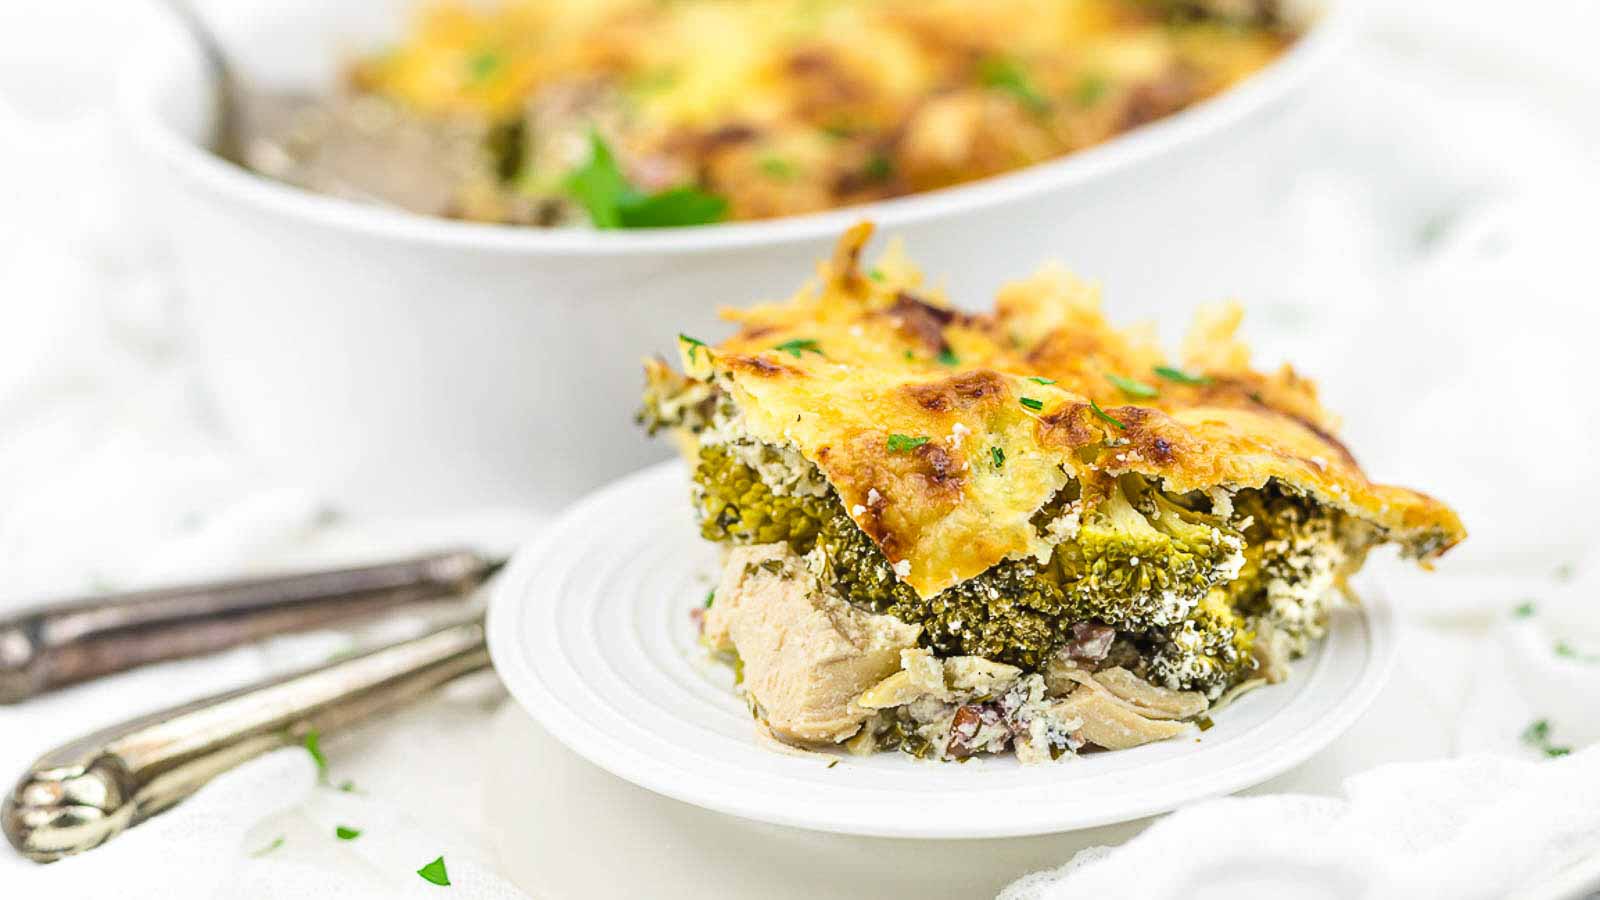 Chicken and broccoli casserole on a white plate.